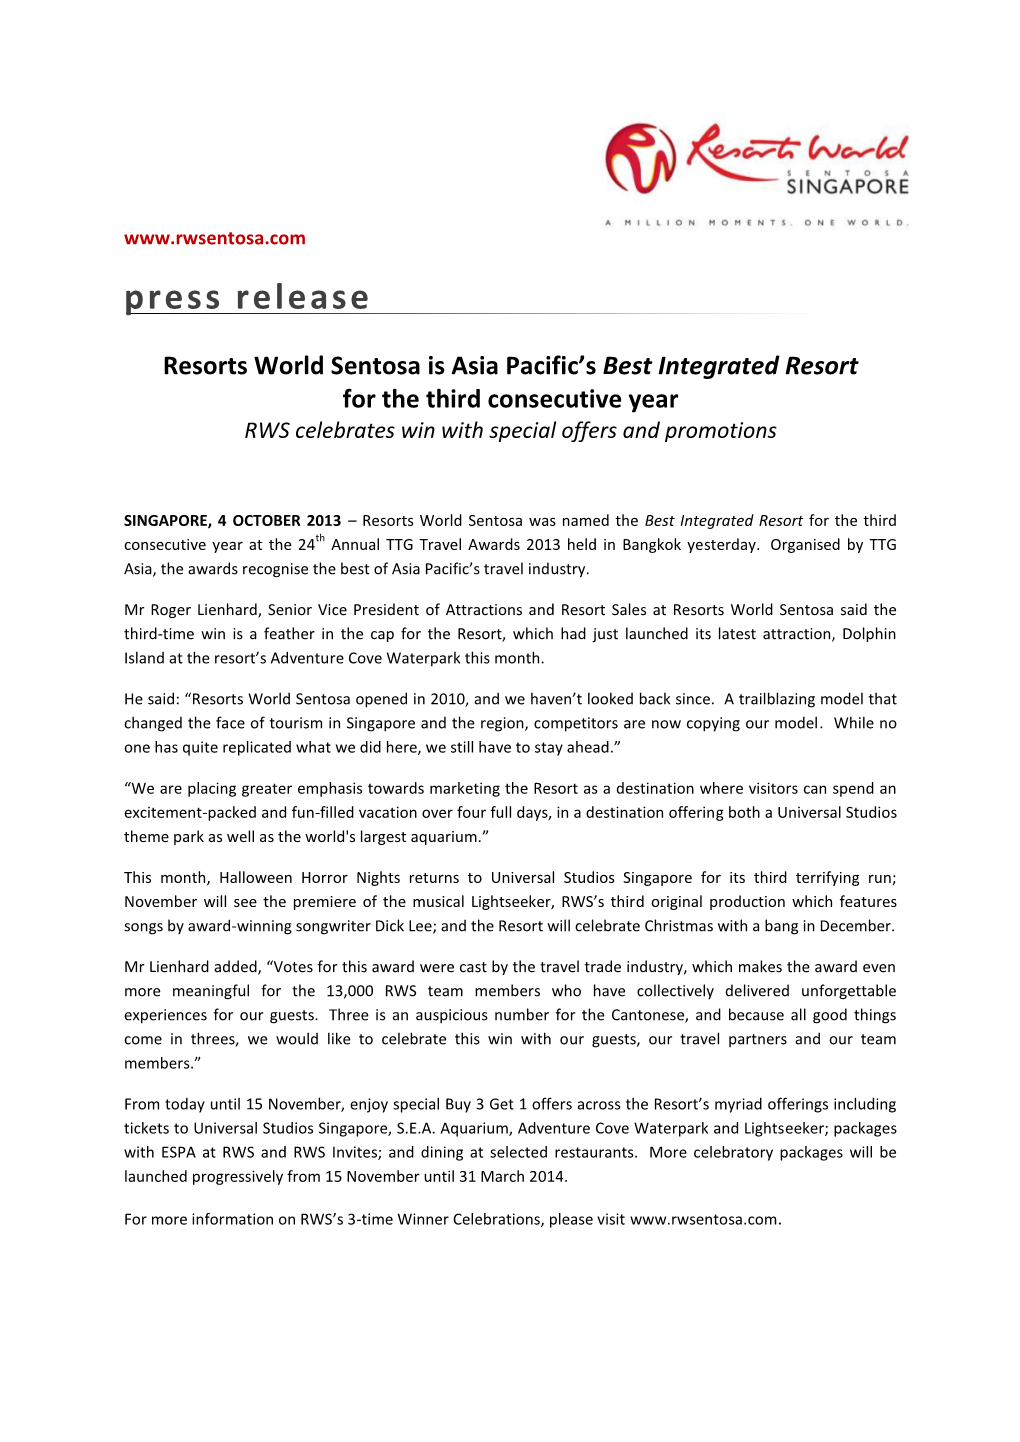 Resorts World Sentosa Is Asia Pacific's Best Integrated Resort For